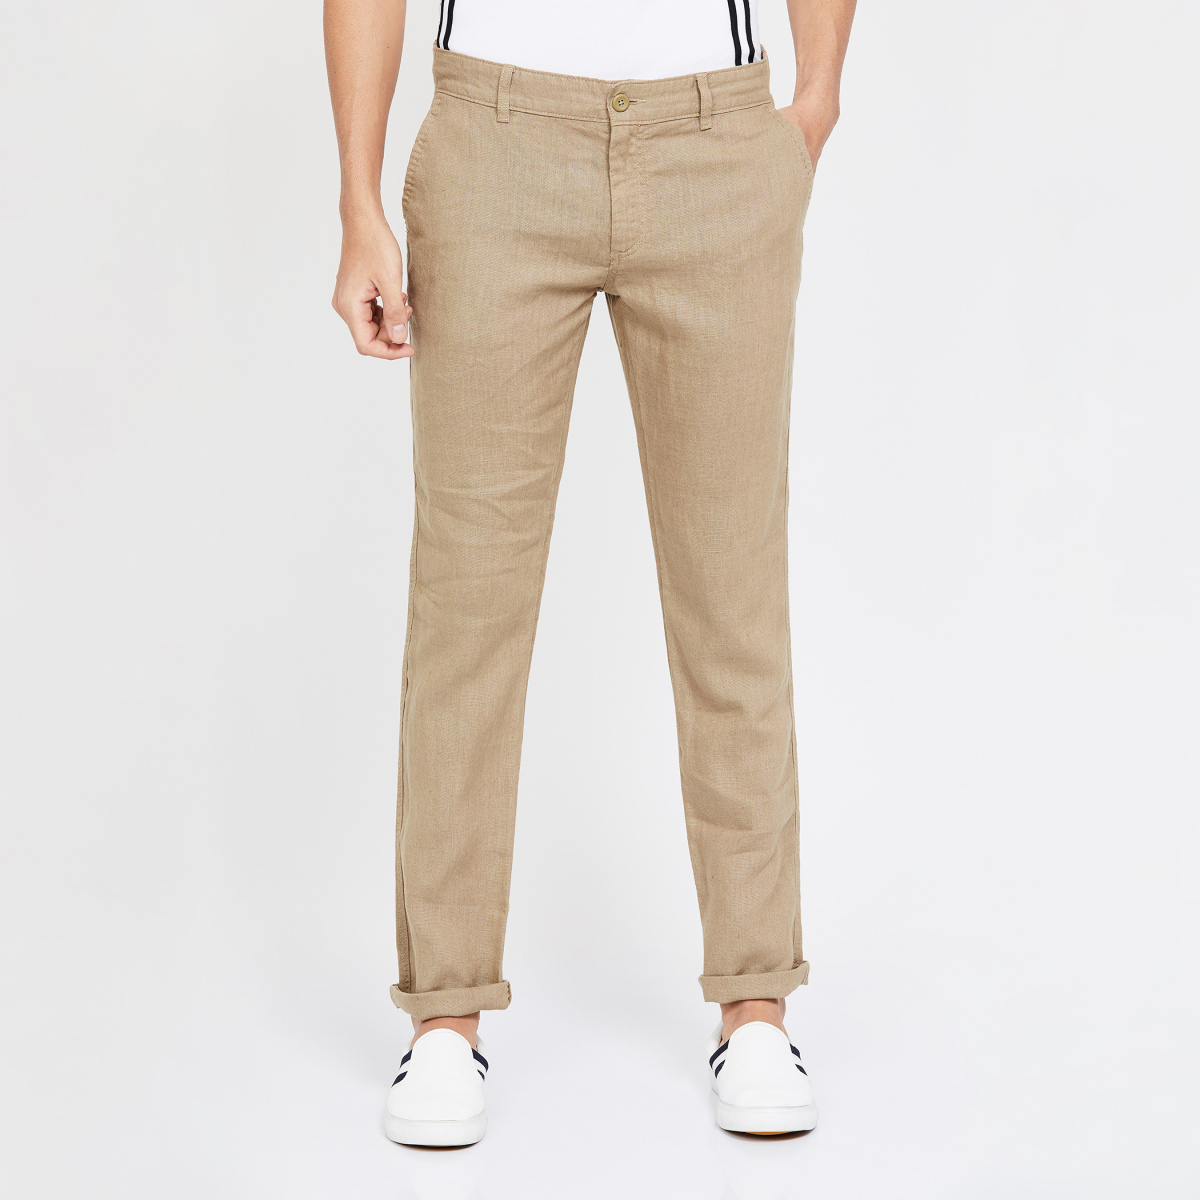 CELIO Textured Slim Tapered Casual Trousers